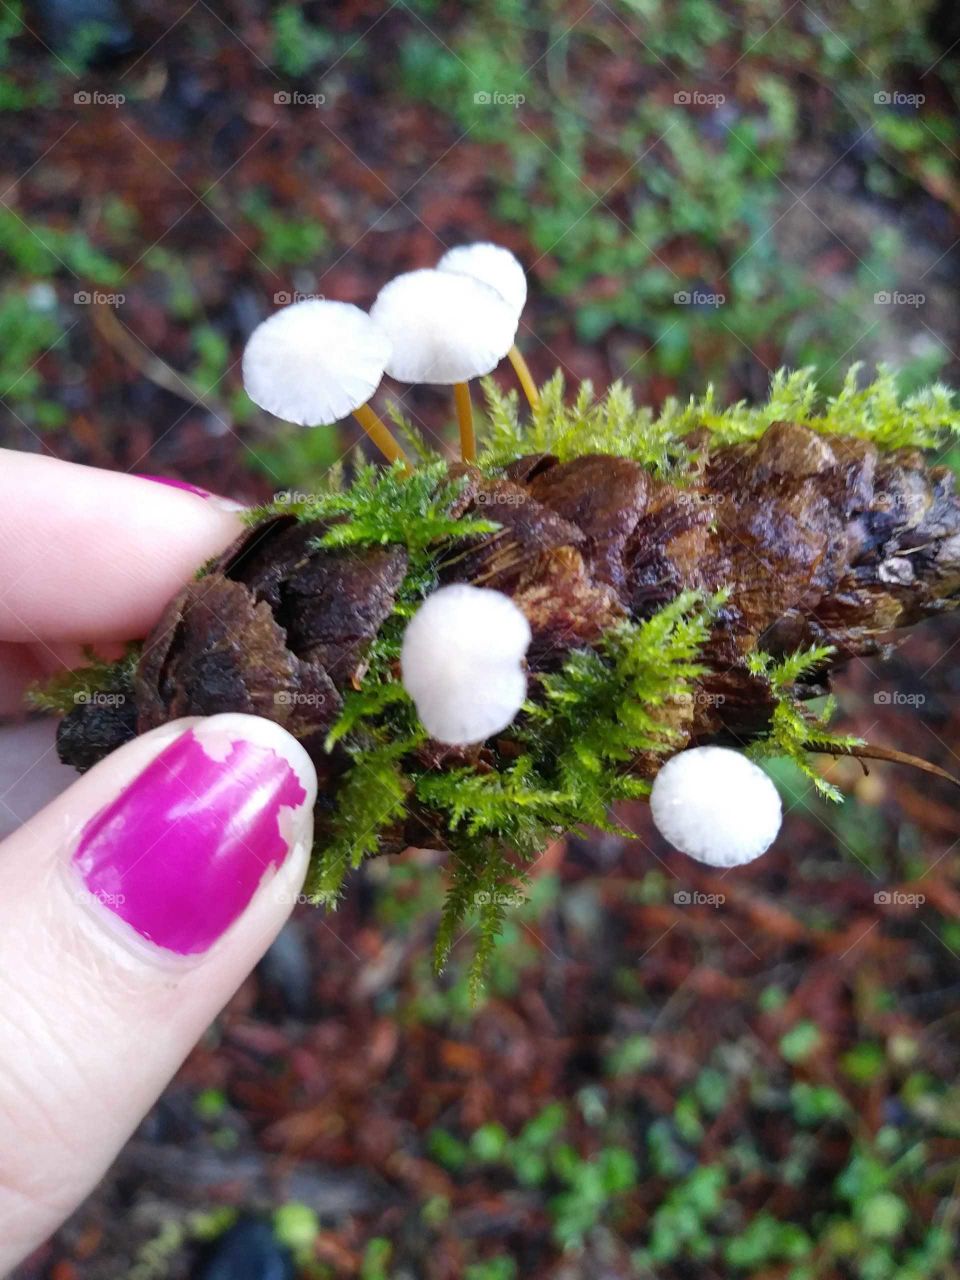 Tiny White Mushrooms Growing On Pinecone with Green Moss In Wilderness